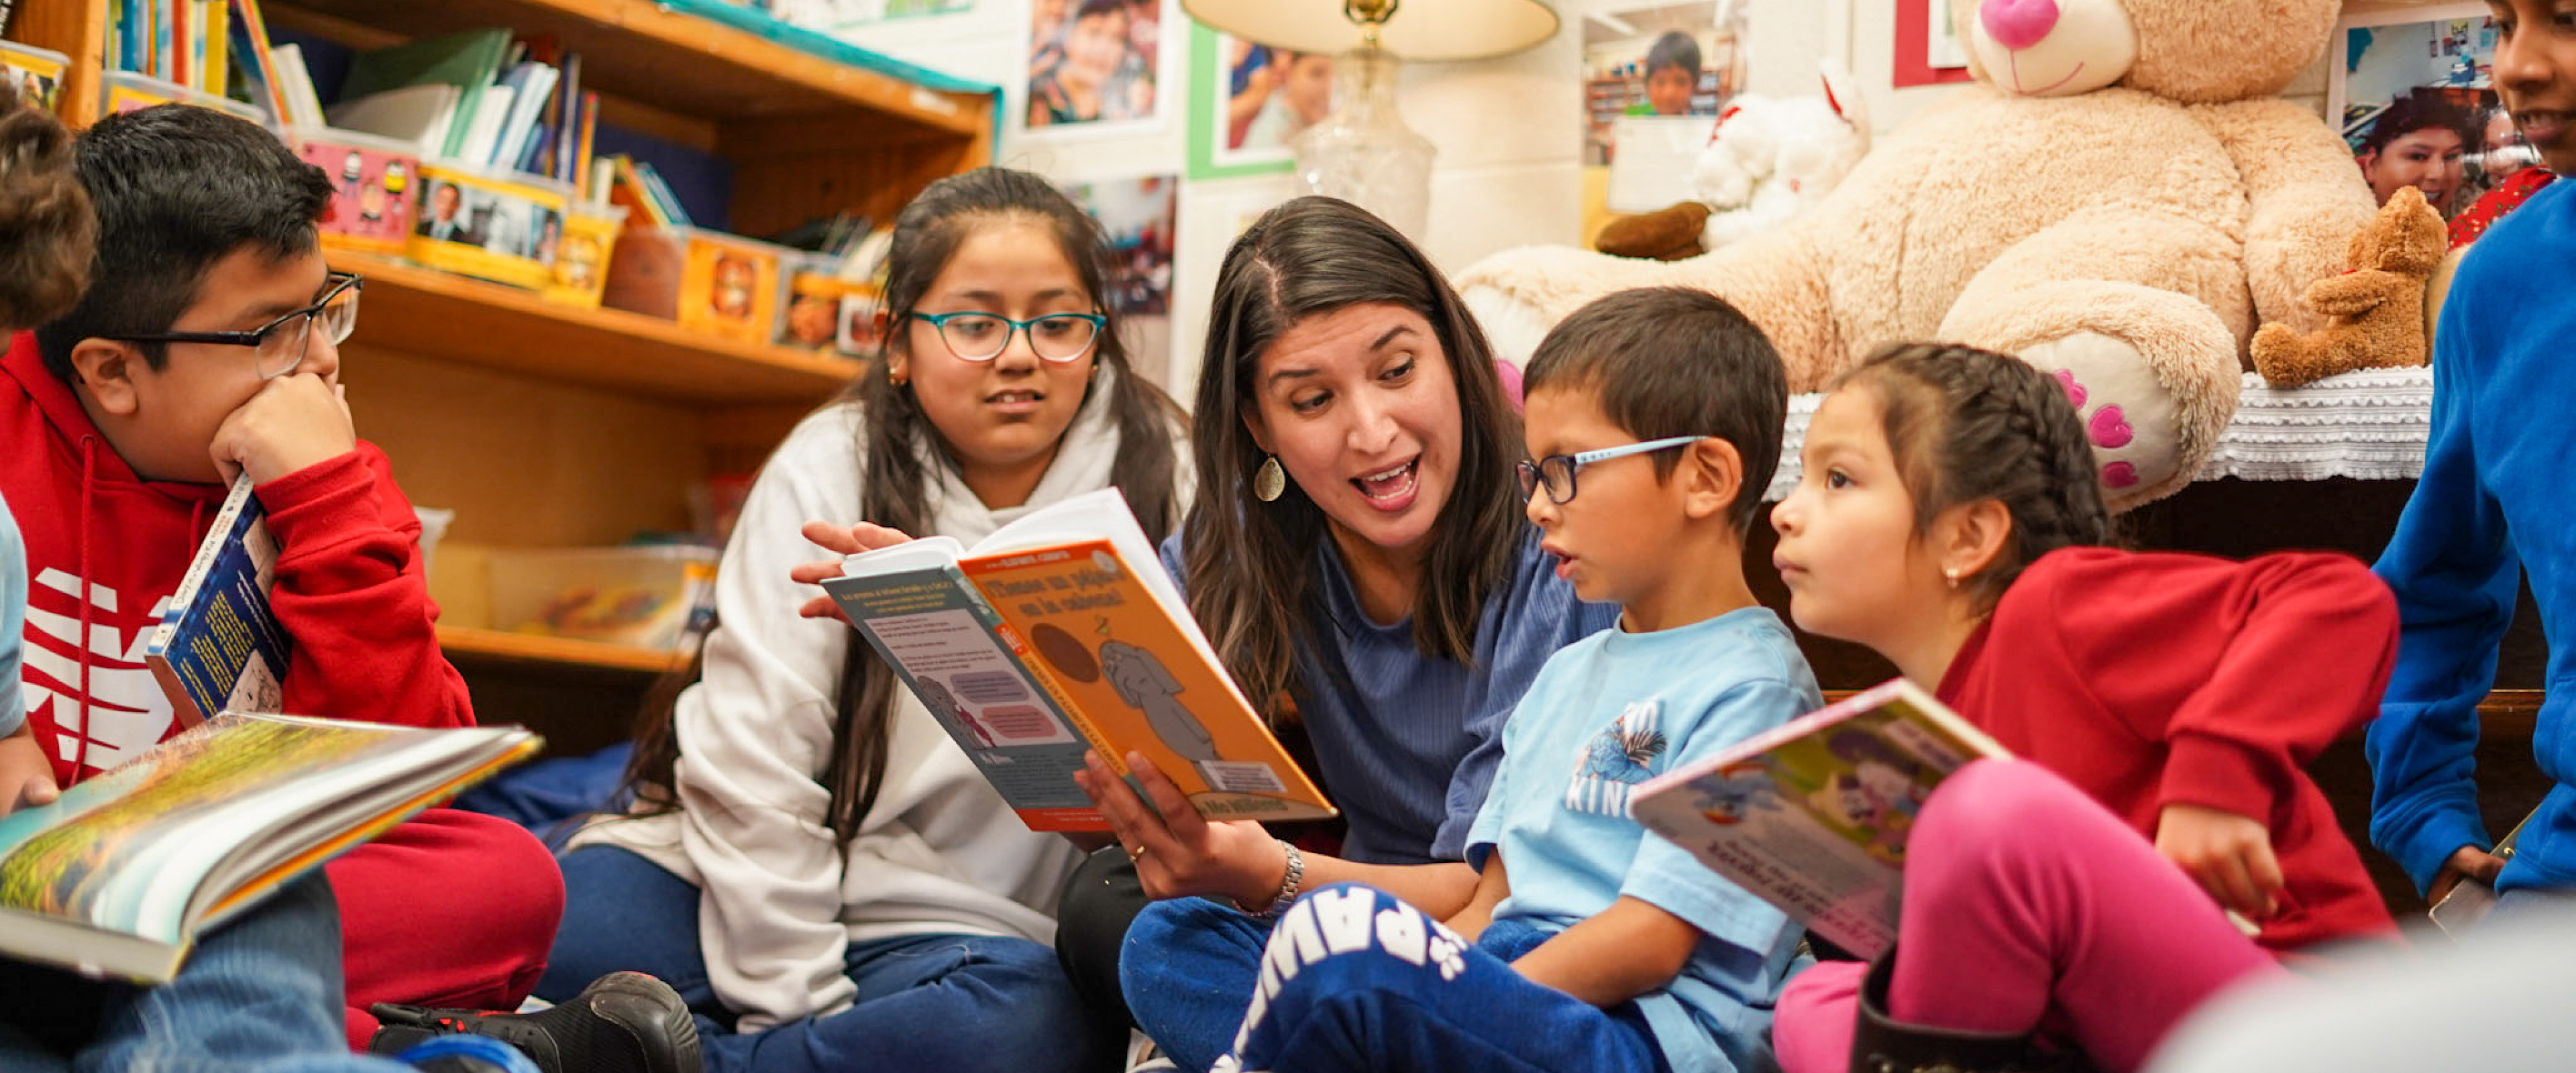 A Western alumna reading to students in her classroom.